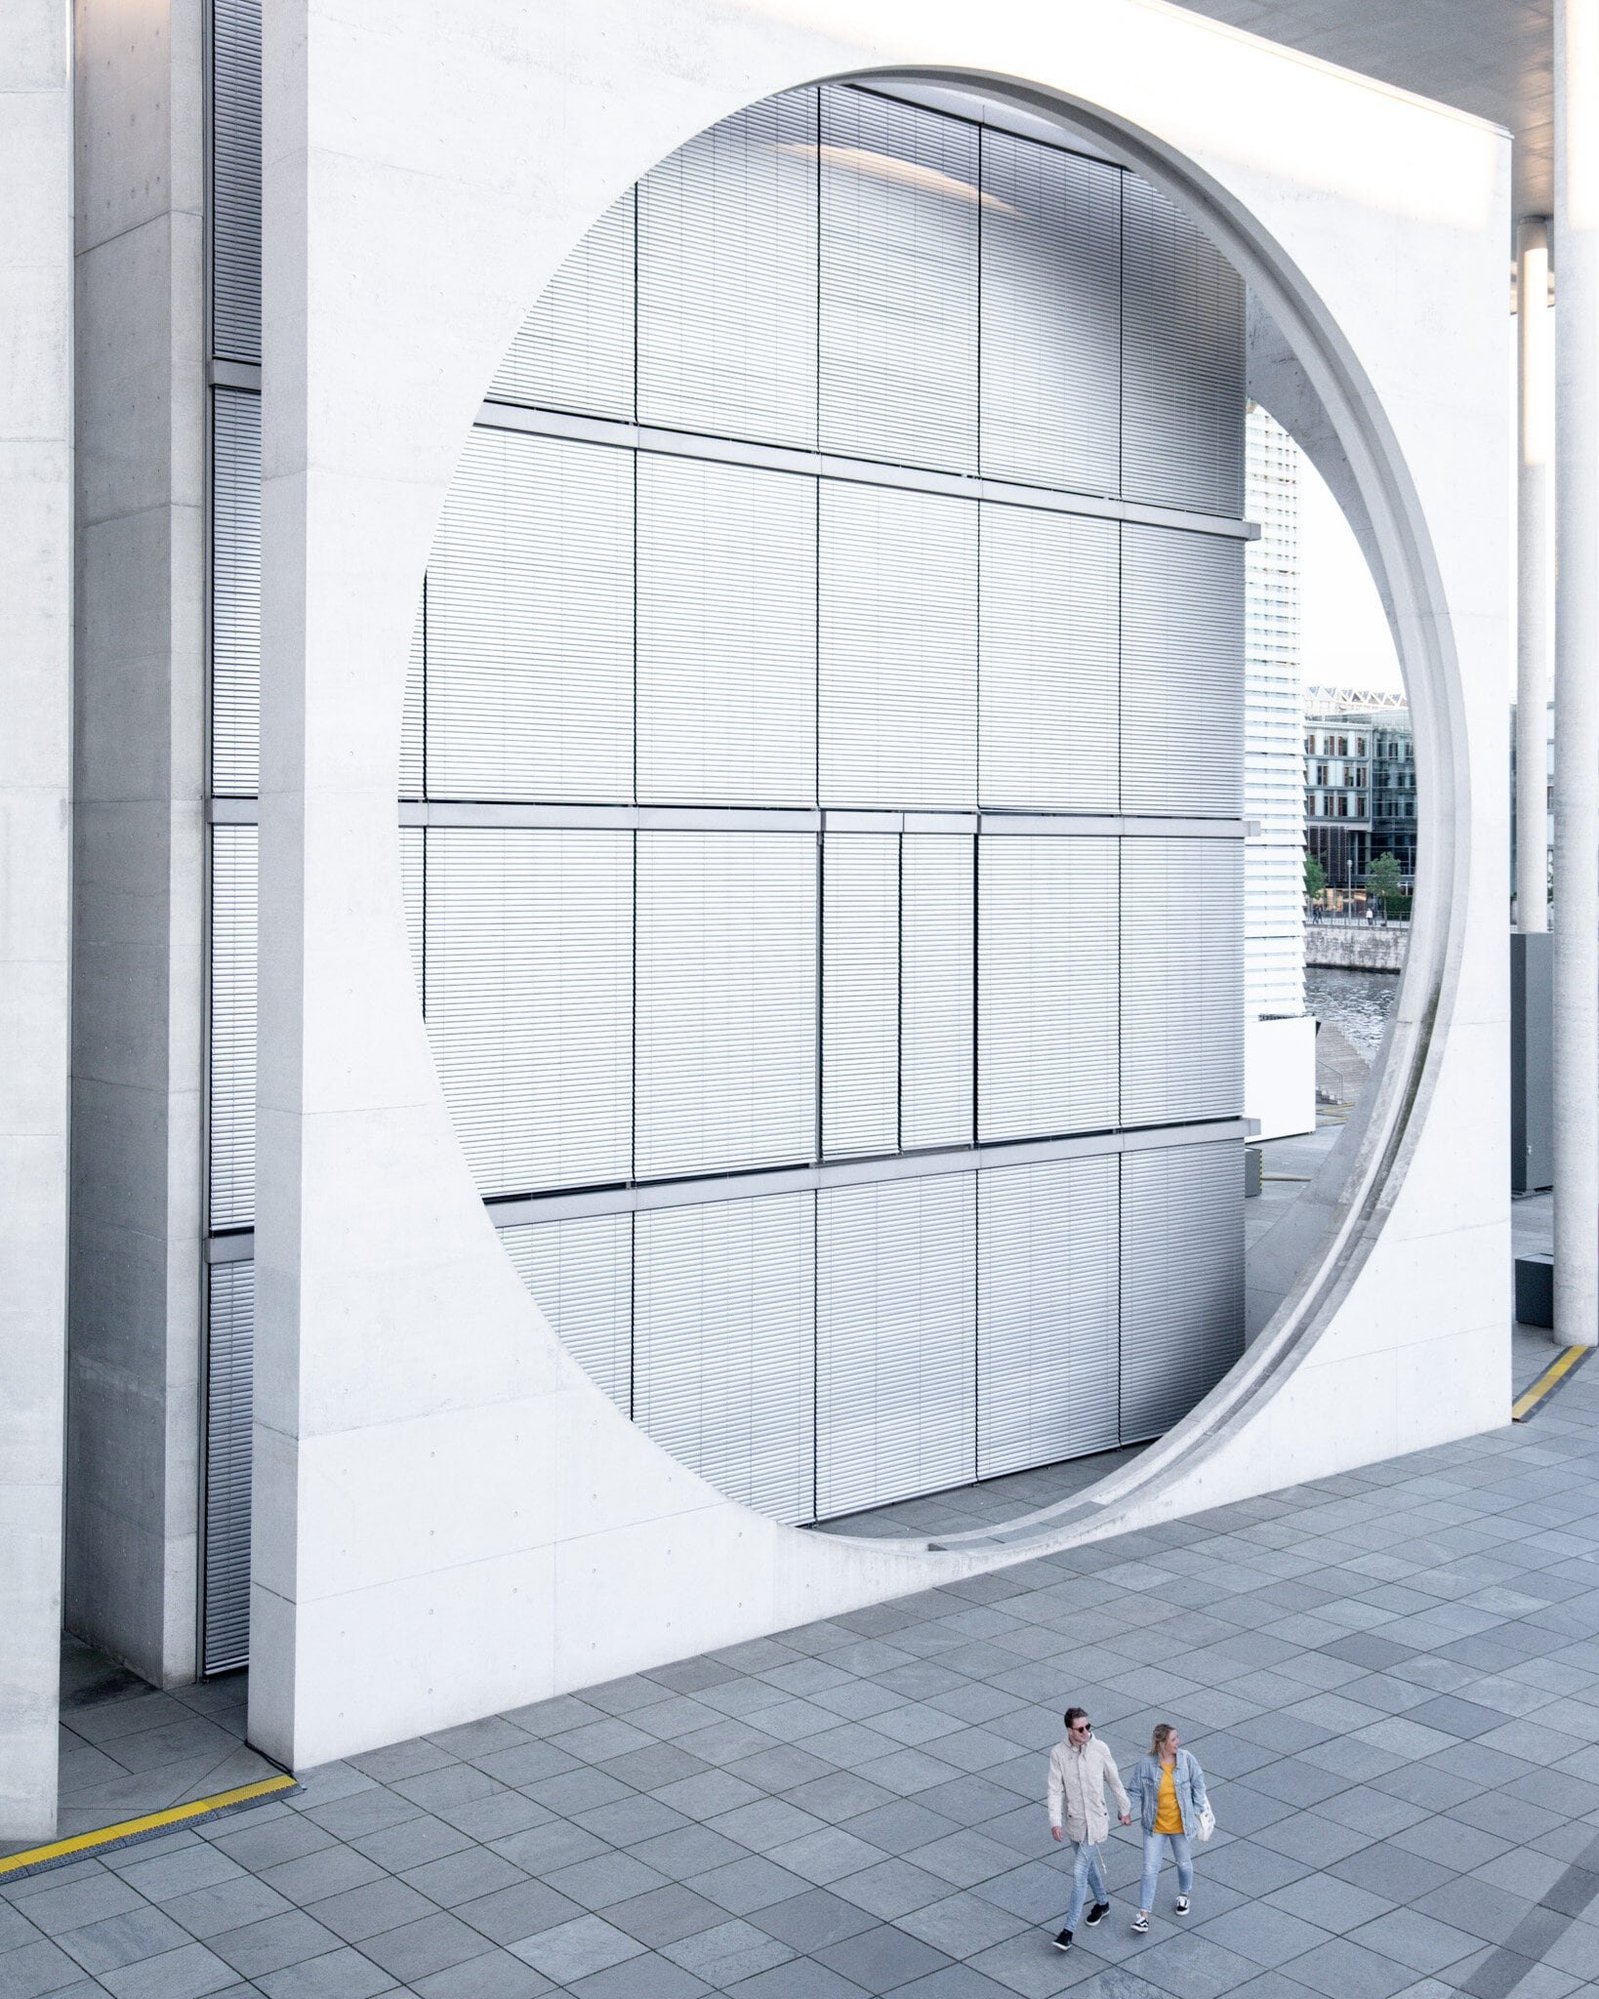 Architecture photography showing couple walking in front of modern building with a round cut out